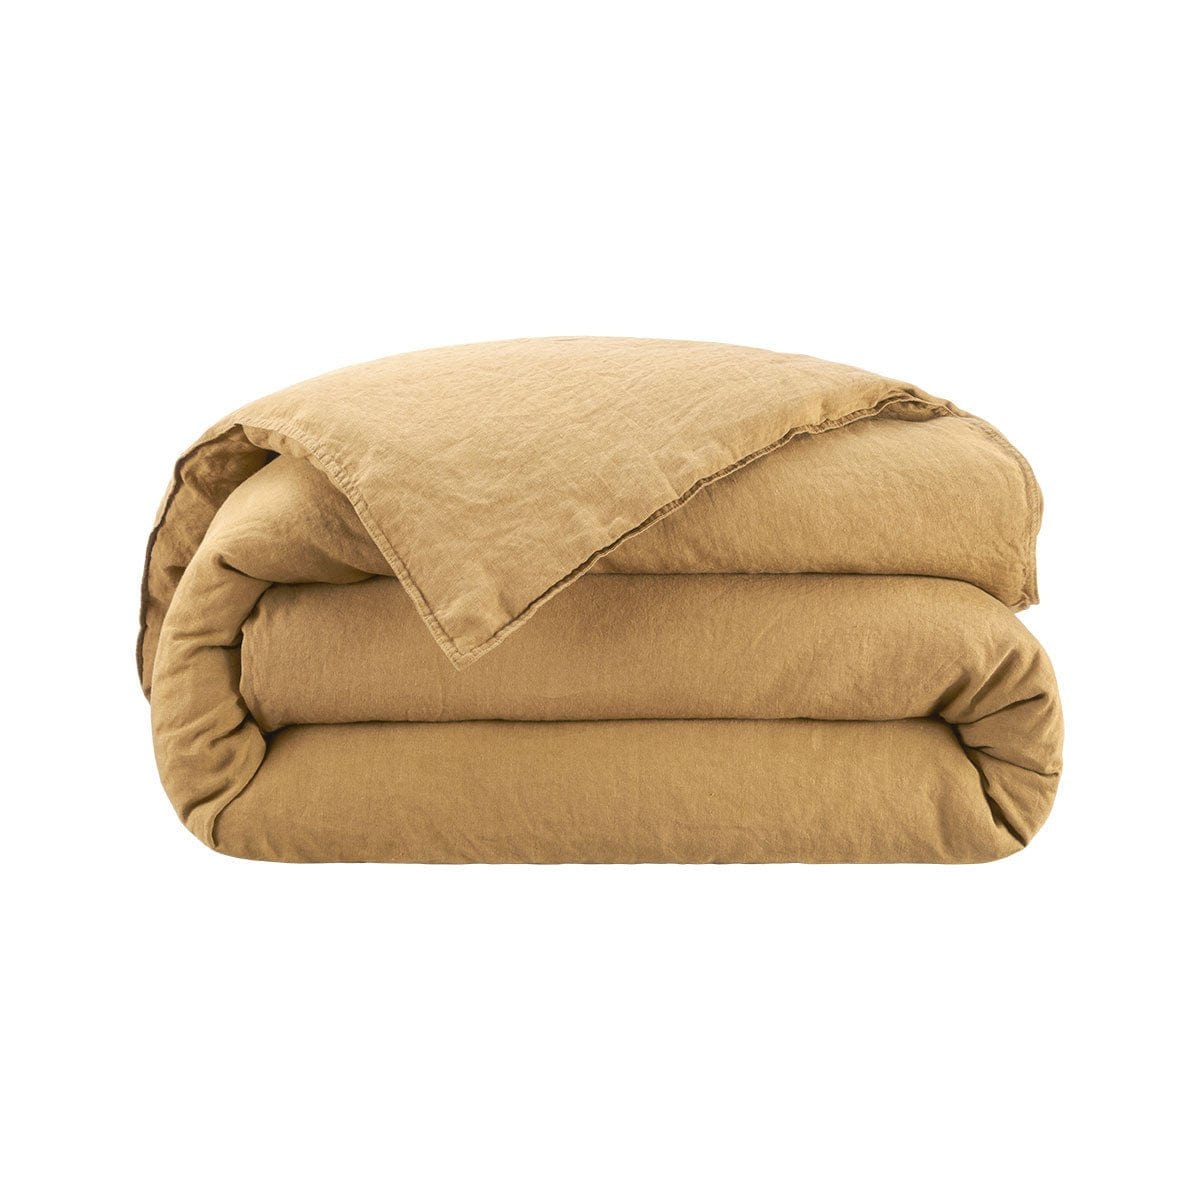 Duvet Covers Originel Duvet Cover by Yves Delorme Queen 92x92" / Bronze Yves Delorme